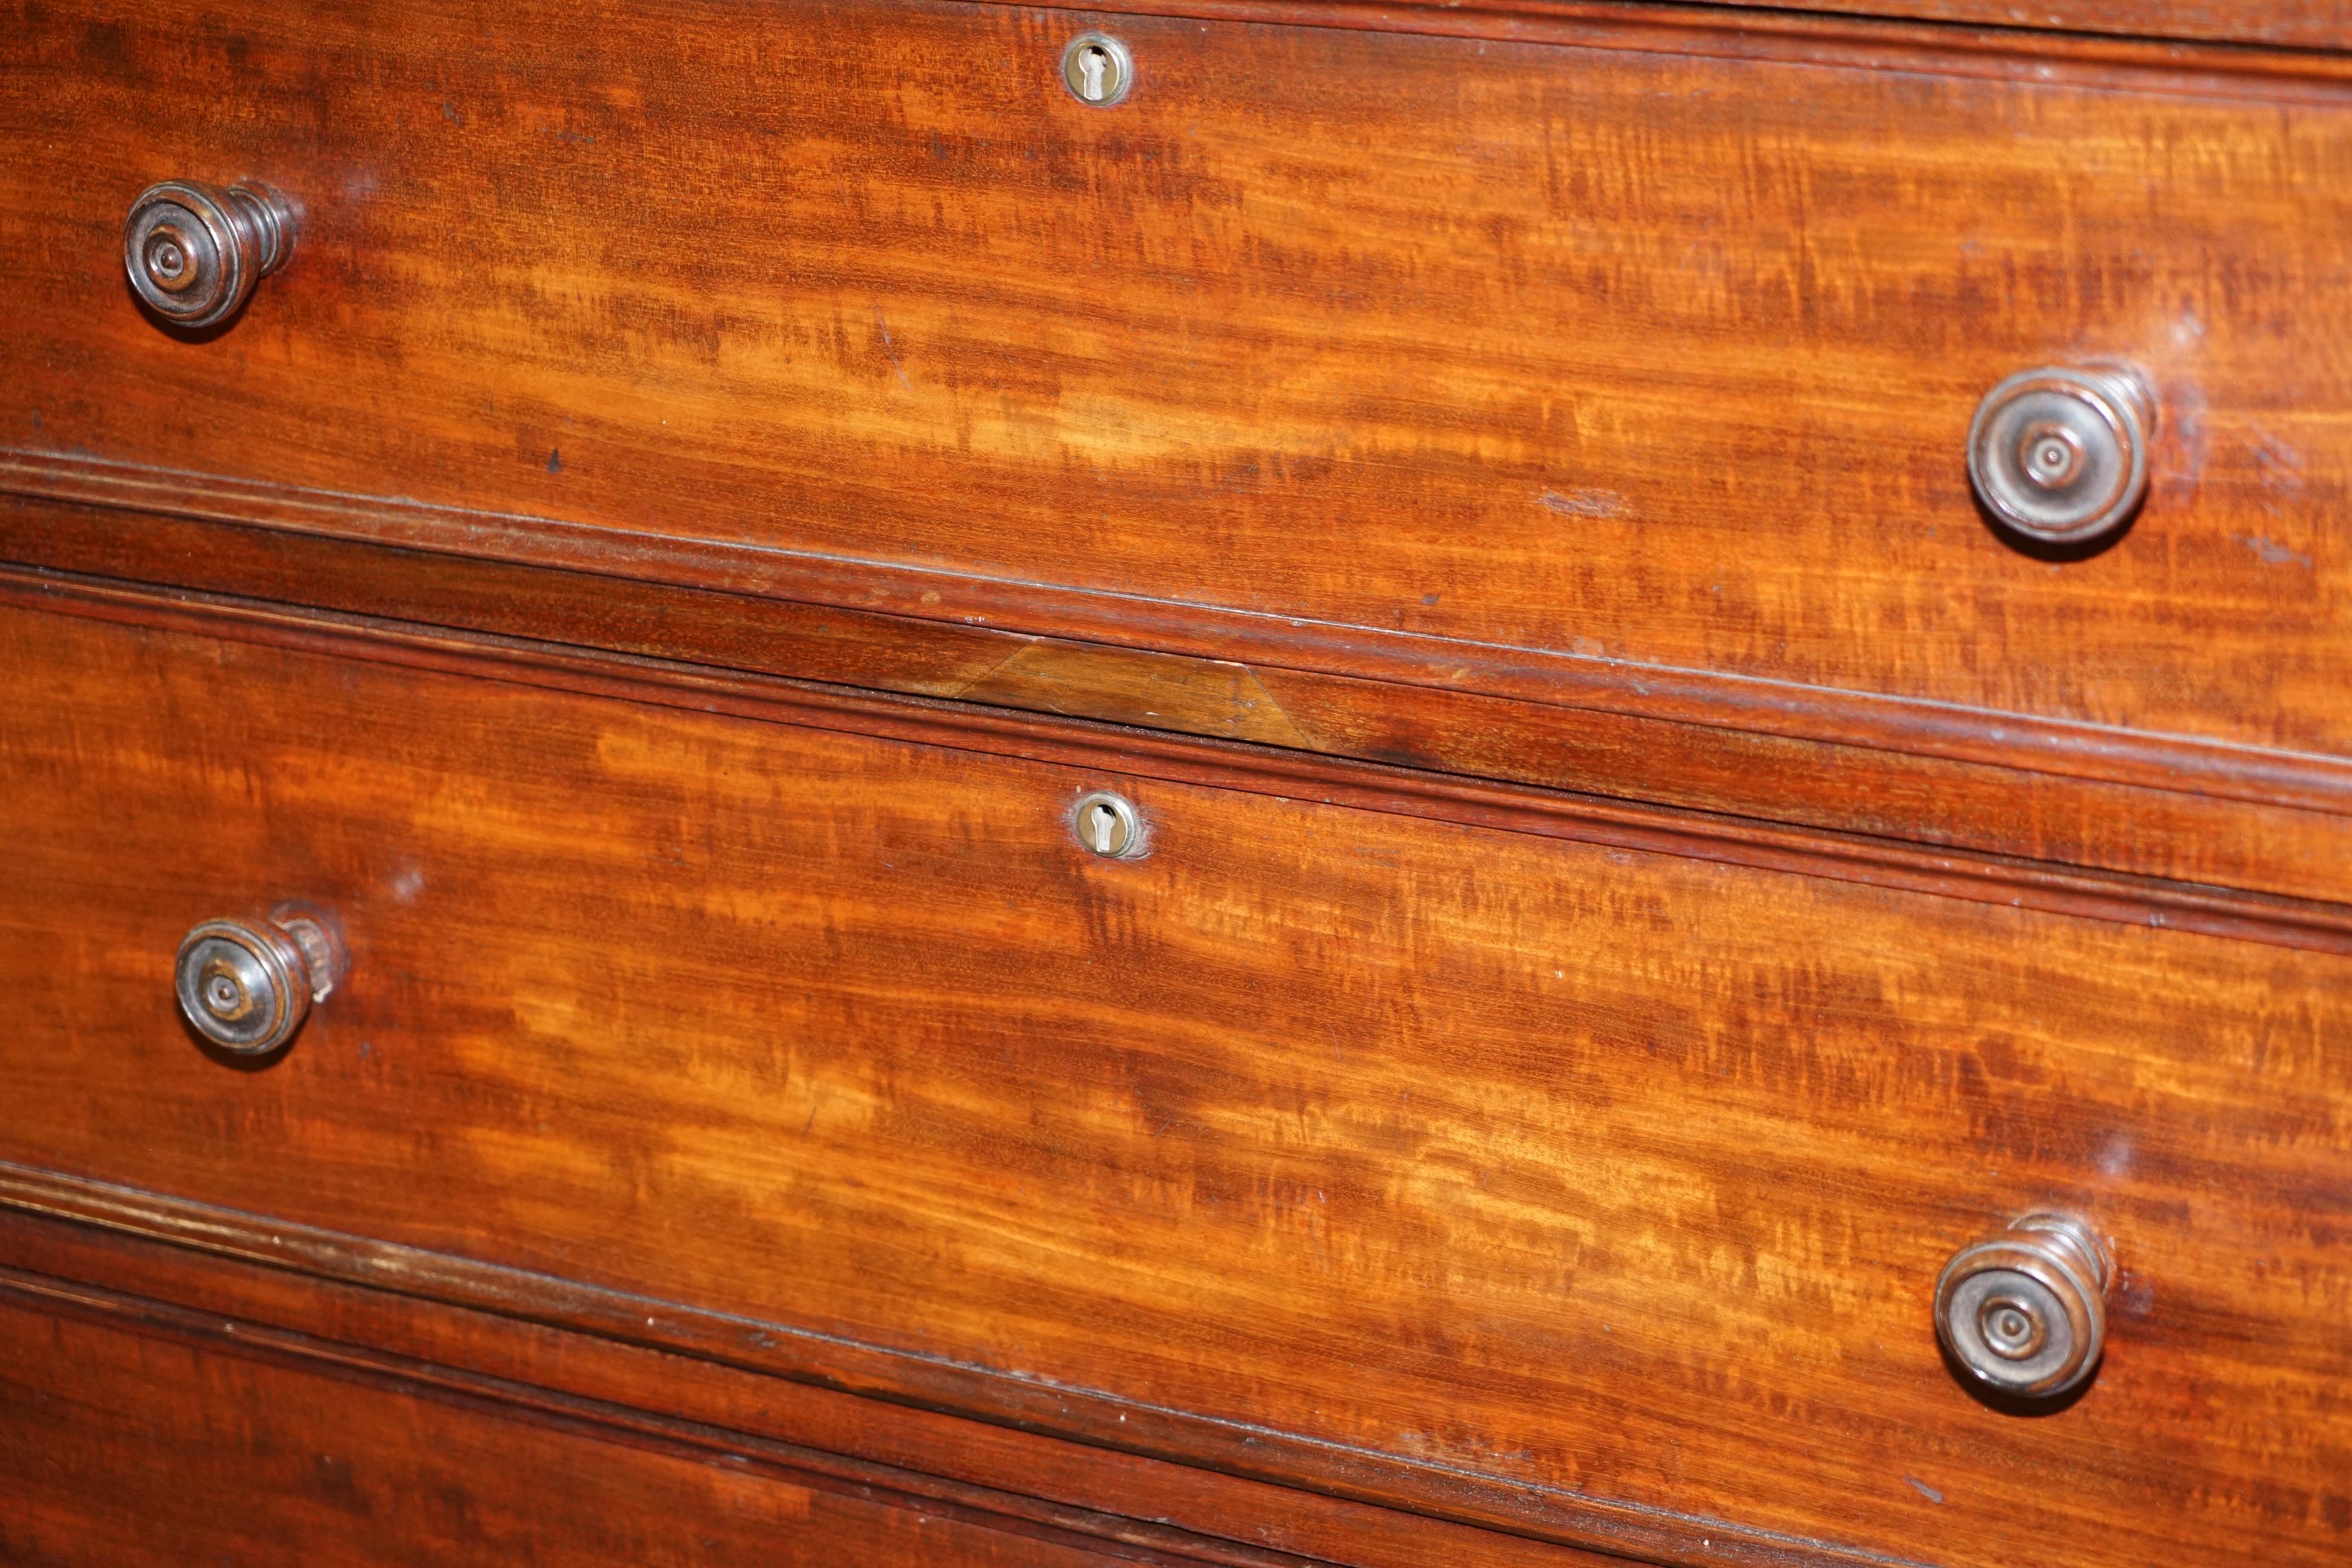 Rare circa 1760 Thomas Wilson 68 Great Queen Street Hardwood Chest of Drawers For Sale 5